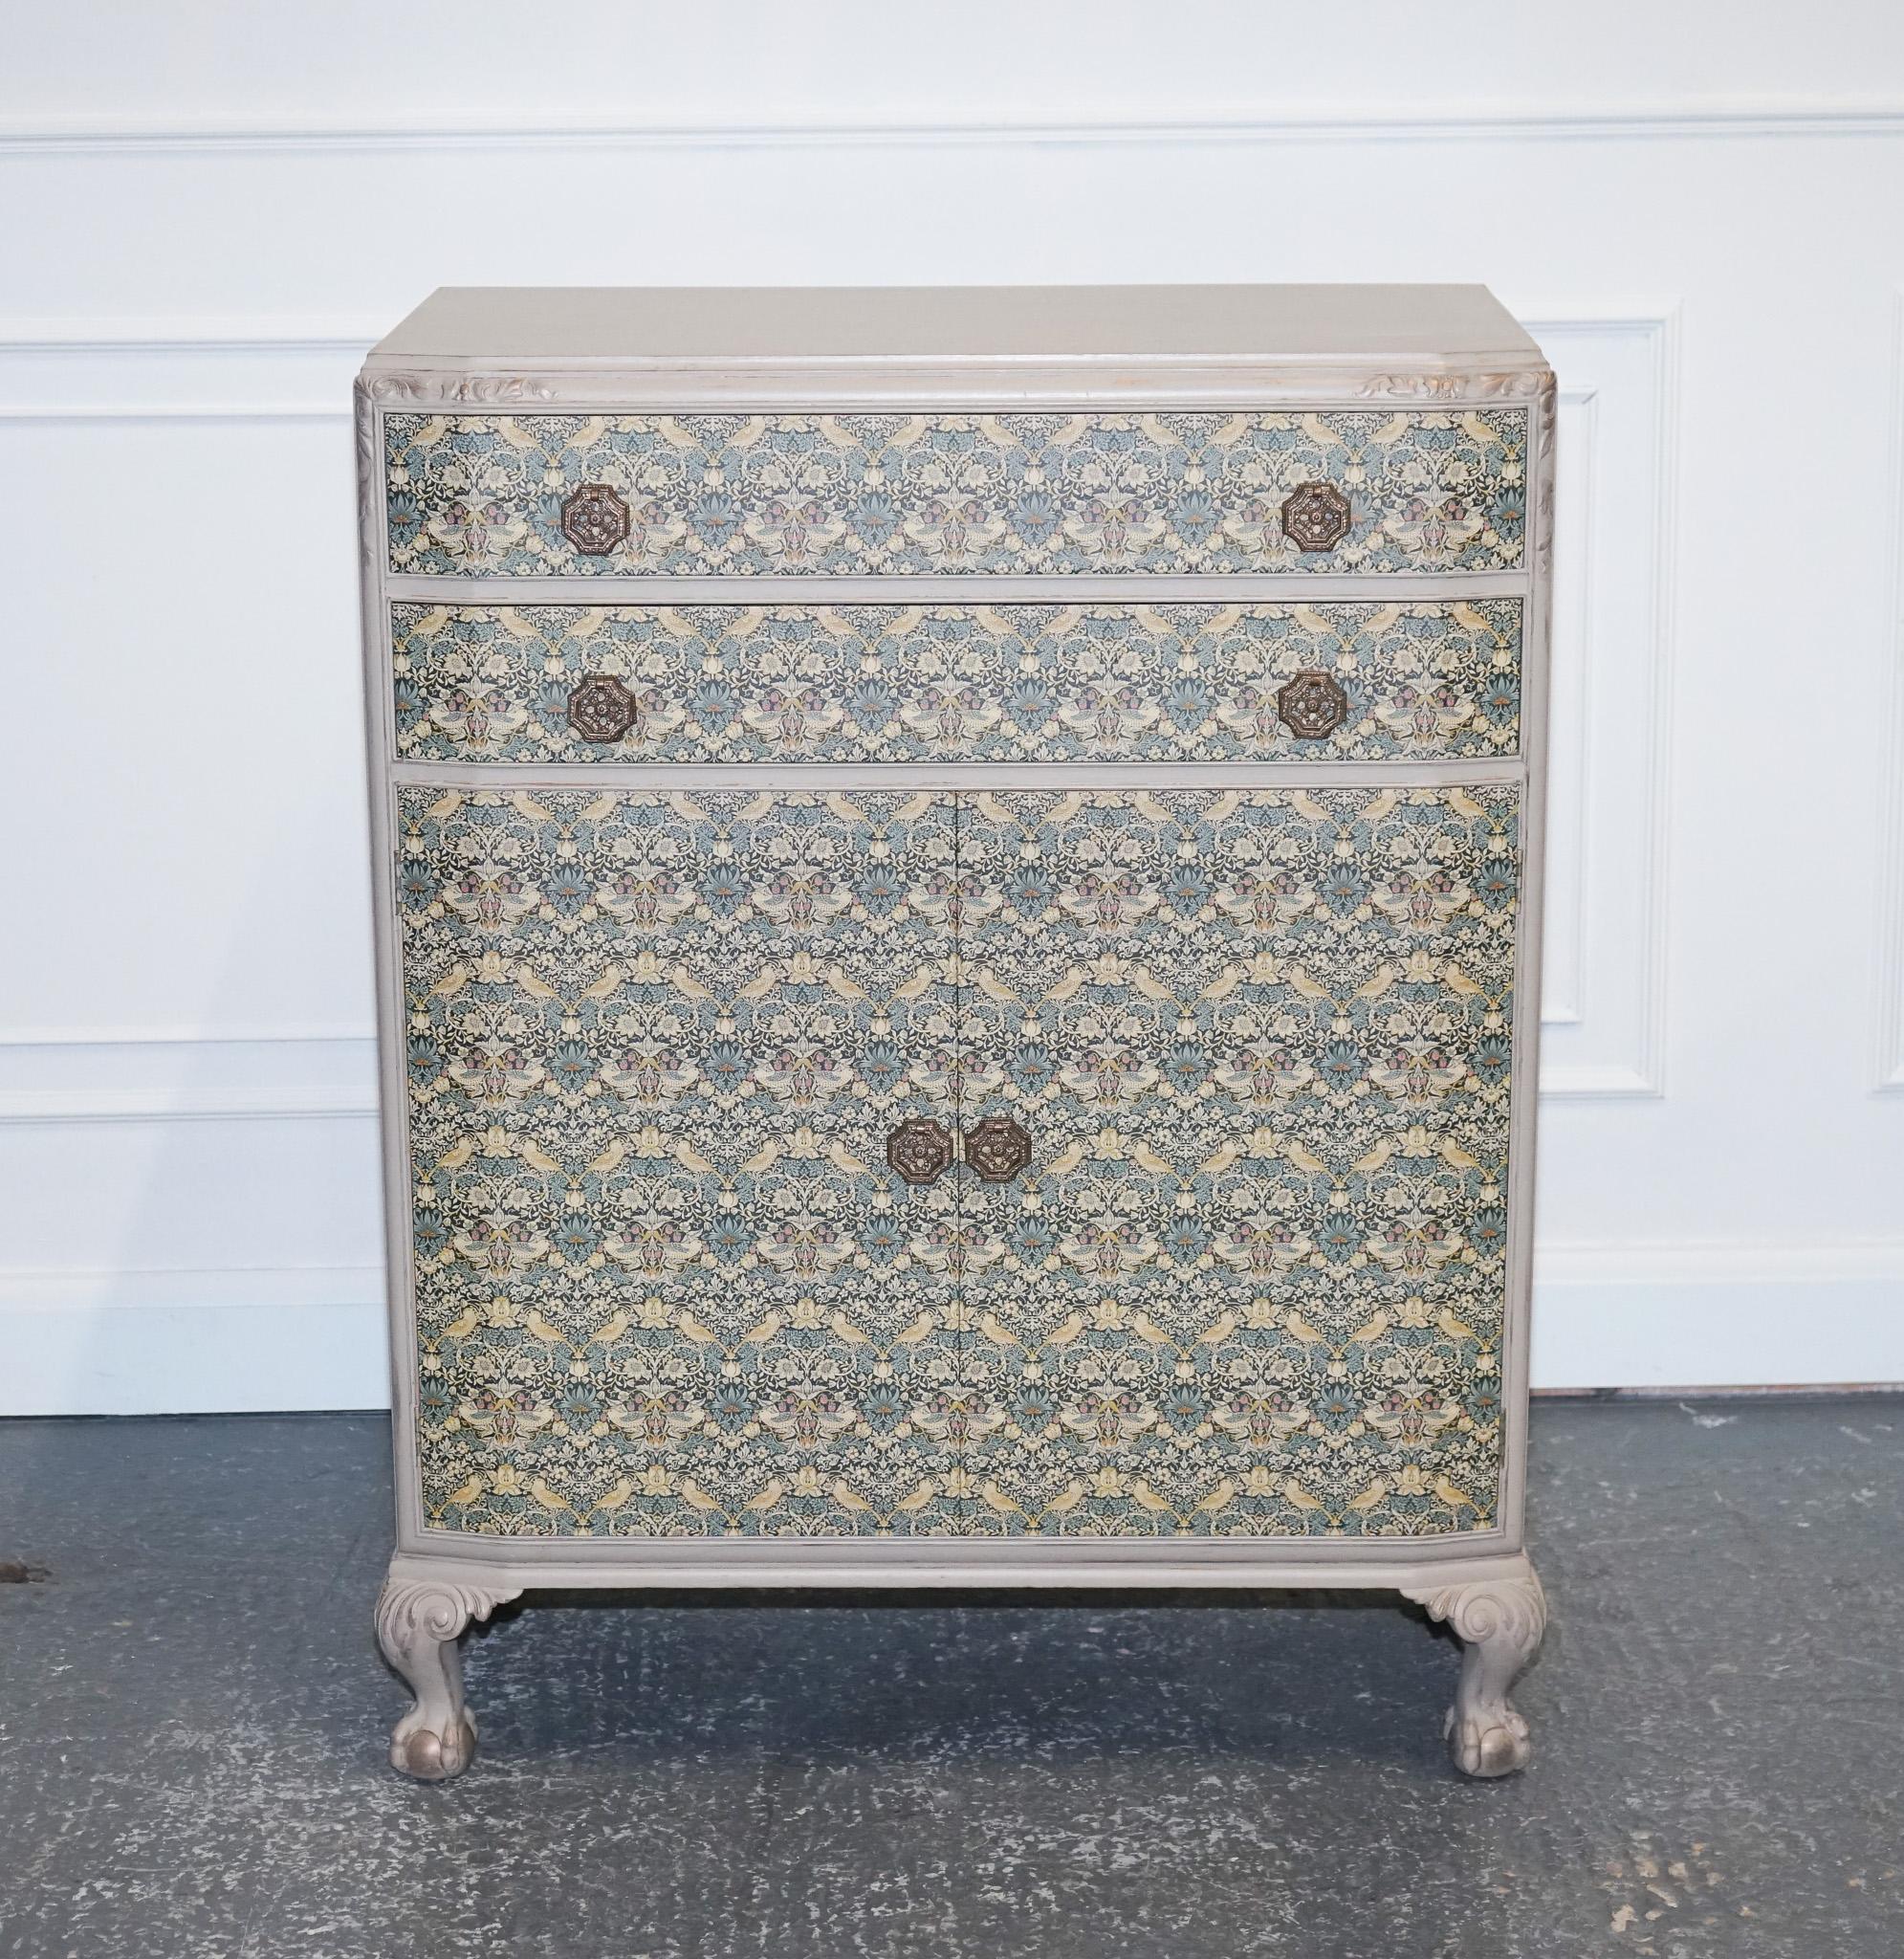 1930s Waring & Gillow Hand Painted Chest of Drawers Cupboard William Morris In Good Condition For Sale In Pulborough, GB